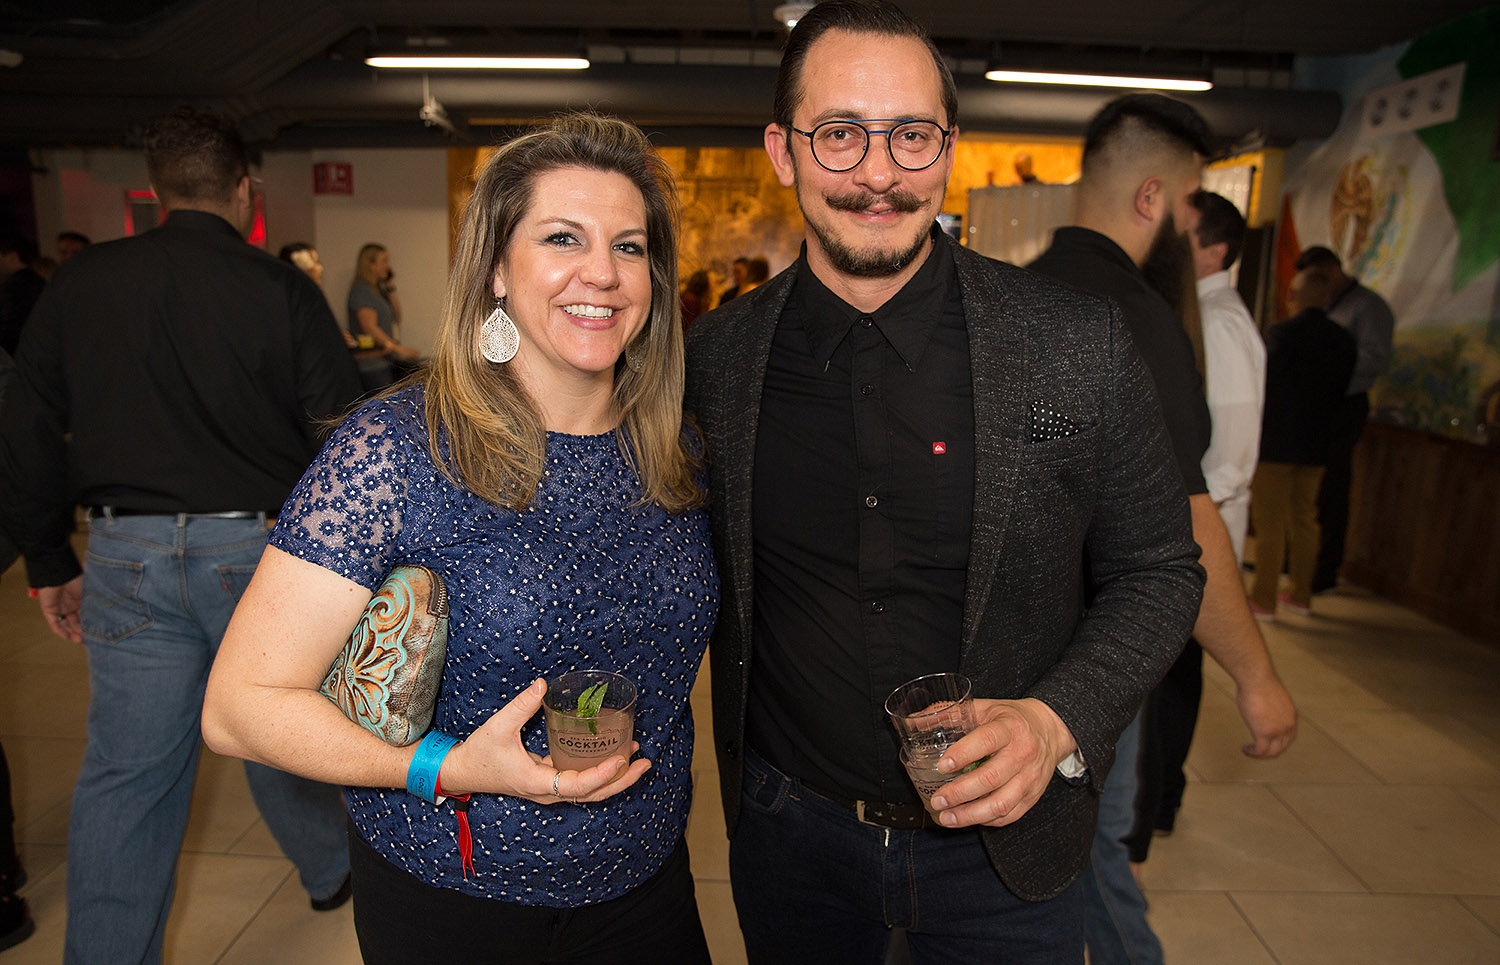 Come & Taste It! event kicks off the 2019 San Antonio Cocktail Festival Thursday night at Battle for Texas: The Experience at Rivercenter Mall.